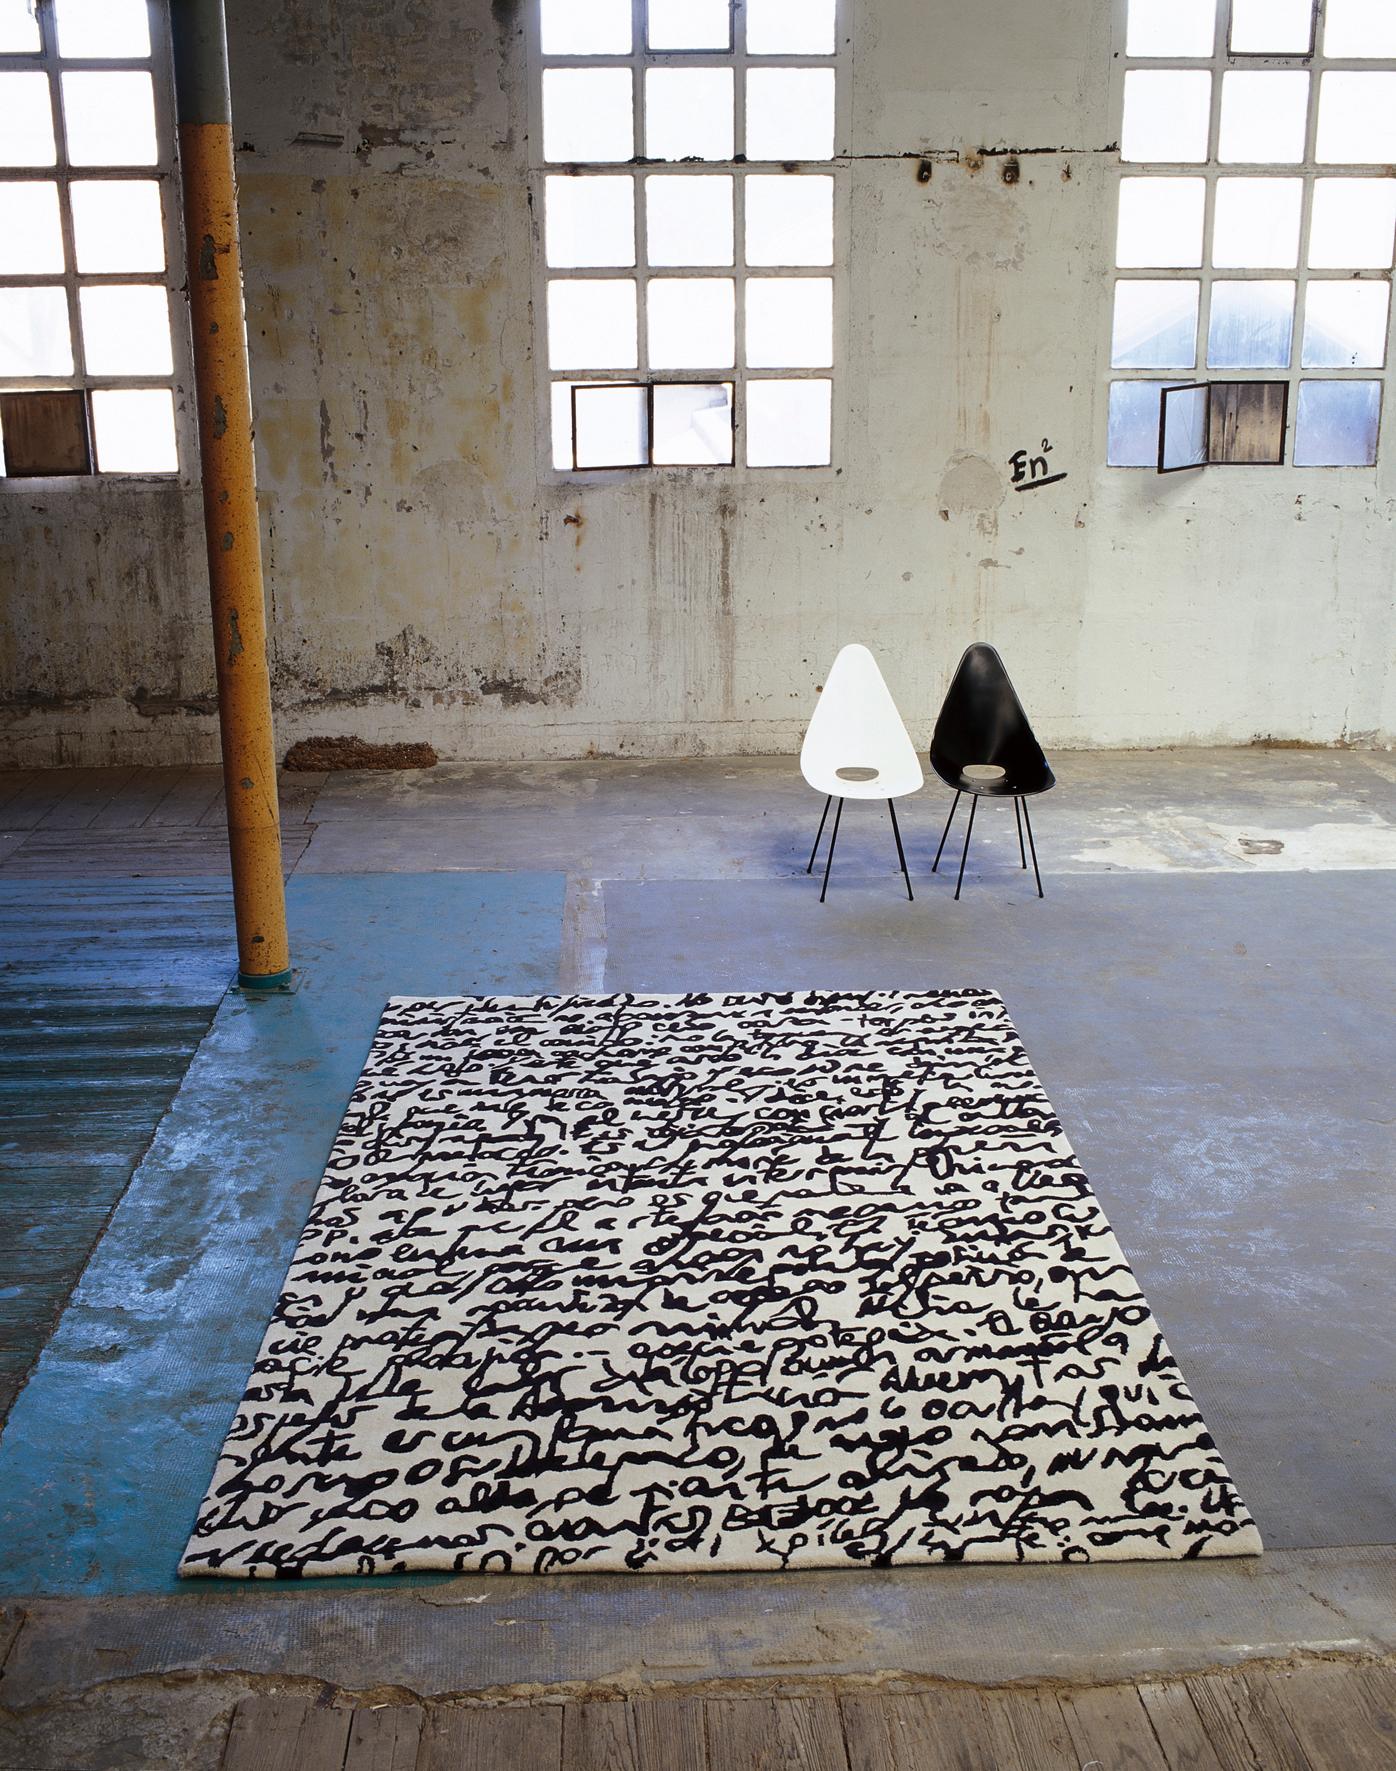 Hand-Tufted 'Manuscrit' rug by Joaquim Ruiz Millet for Nanimarquina.

Executed in 100% hand-tufted New Zealand wool. The absence of color makes each of these rugs a dichotomy, a canvas in its own right. The stark contrast of black and white